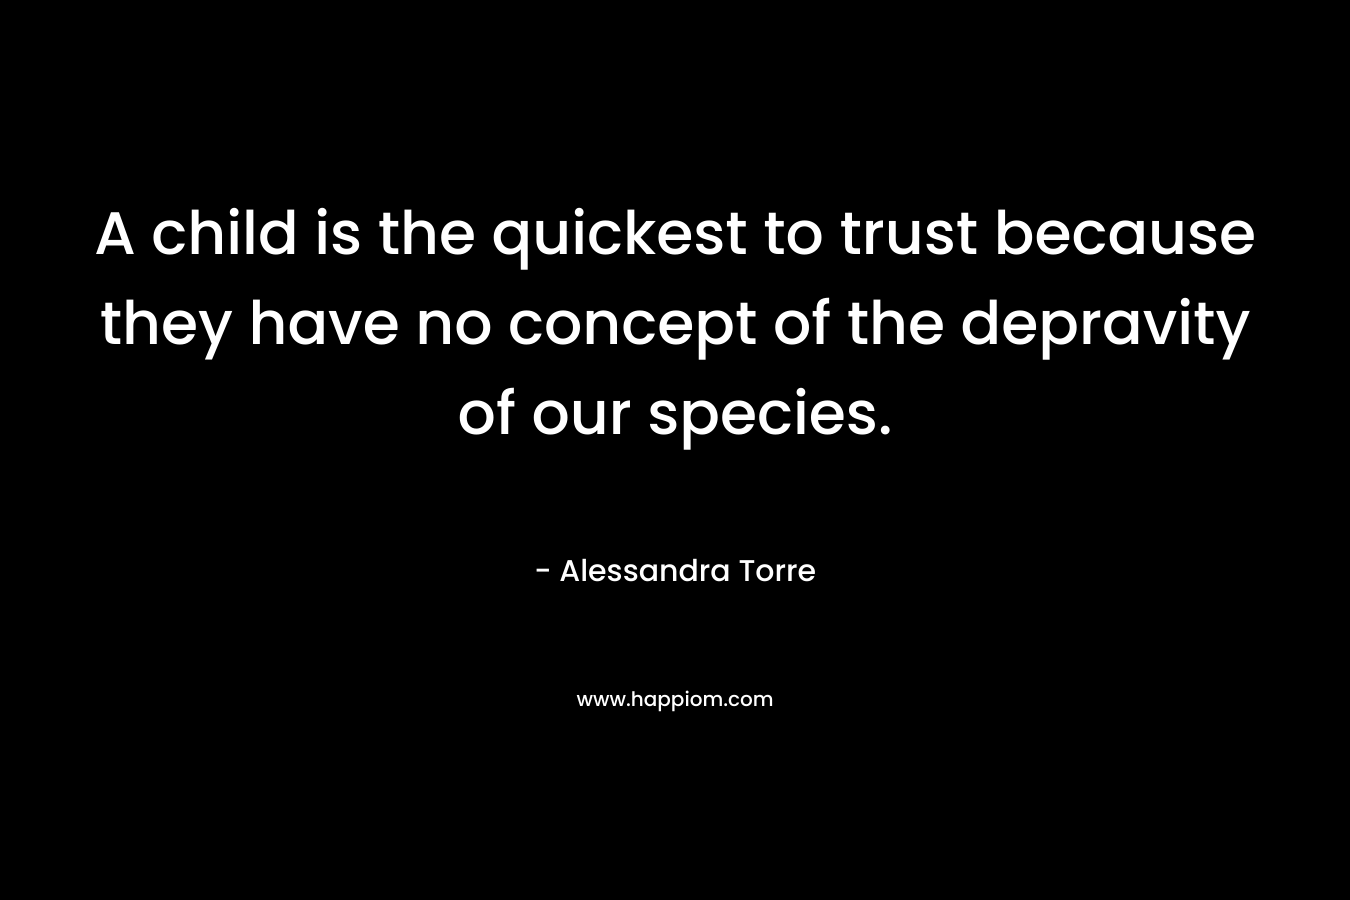 A child is the quickest to trust because they have no concept of the depravity of our species. – Alessandra Torre